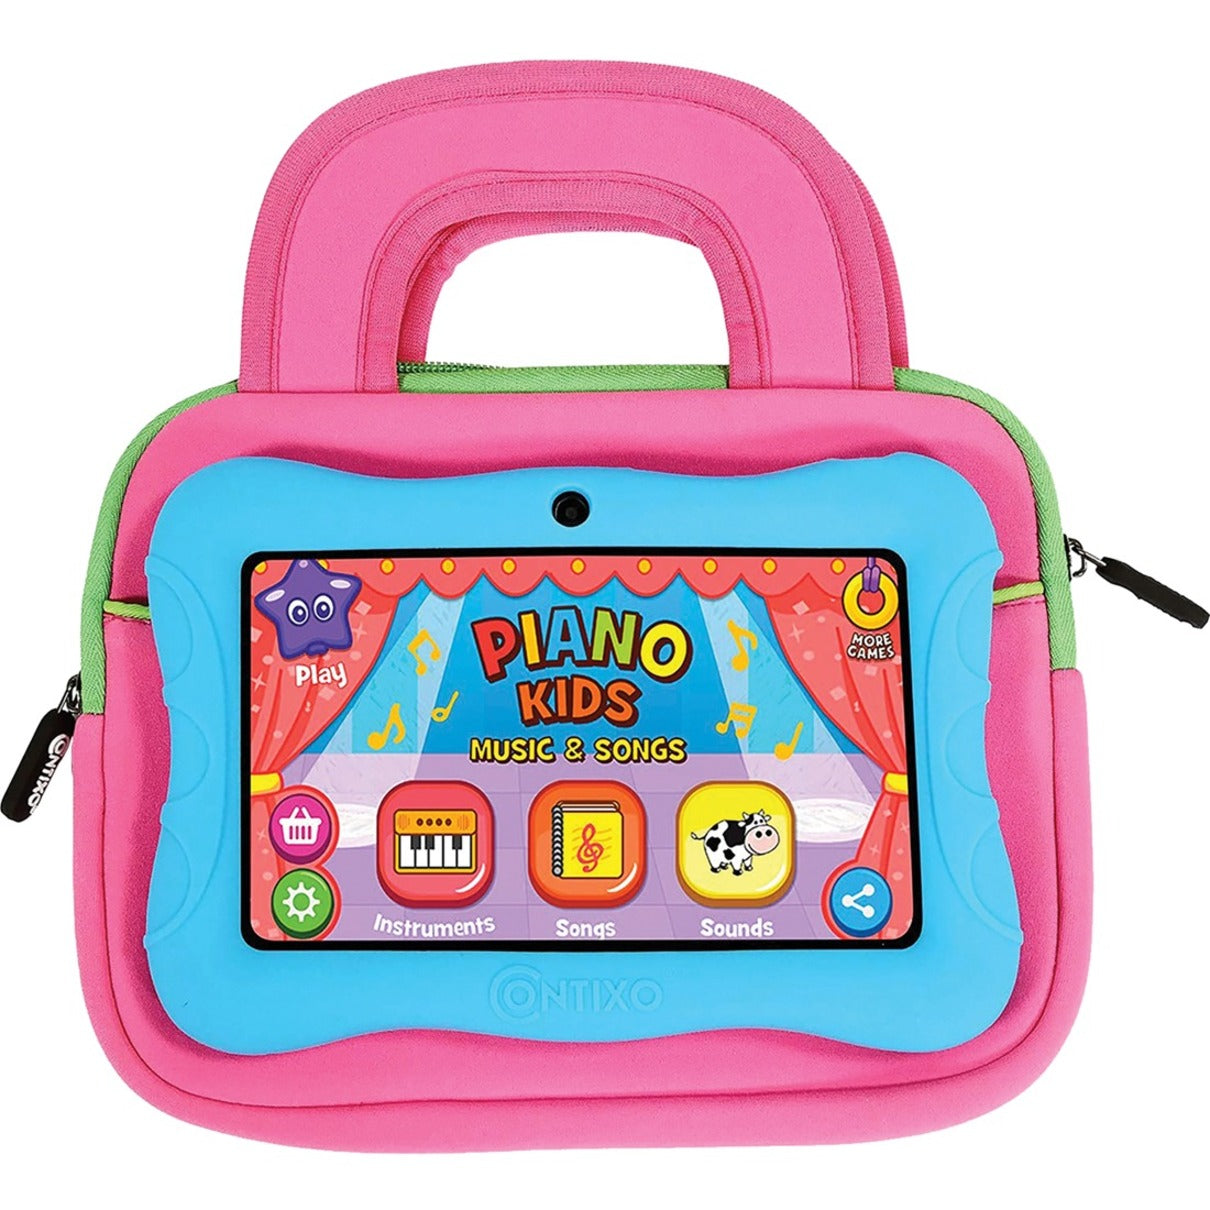 Contixo Tablet Sleeve Bag for K1091 Kids Tablet (Pink) [Discontinued]